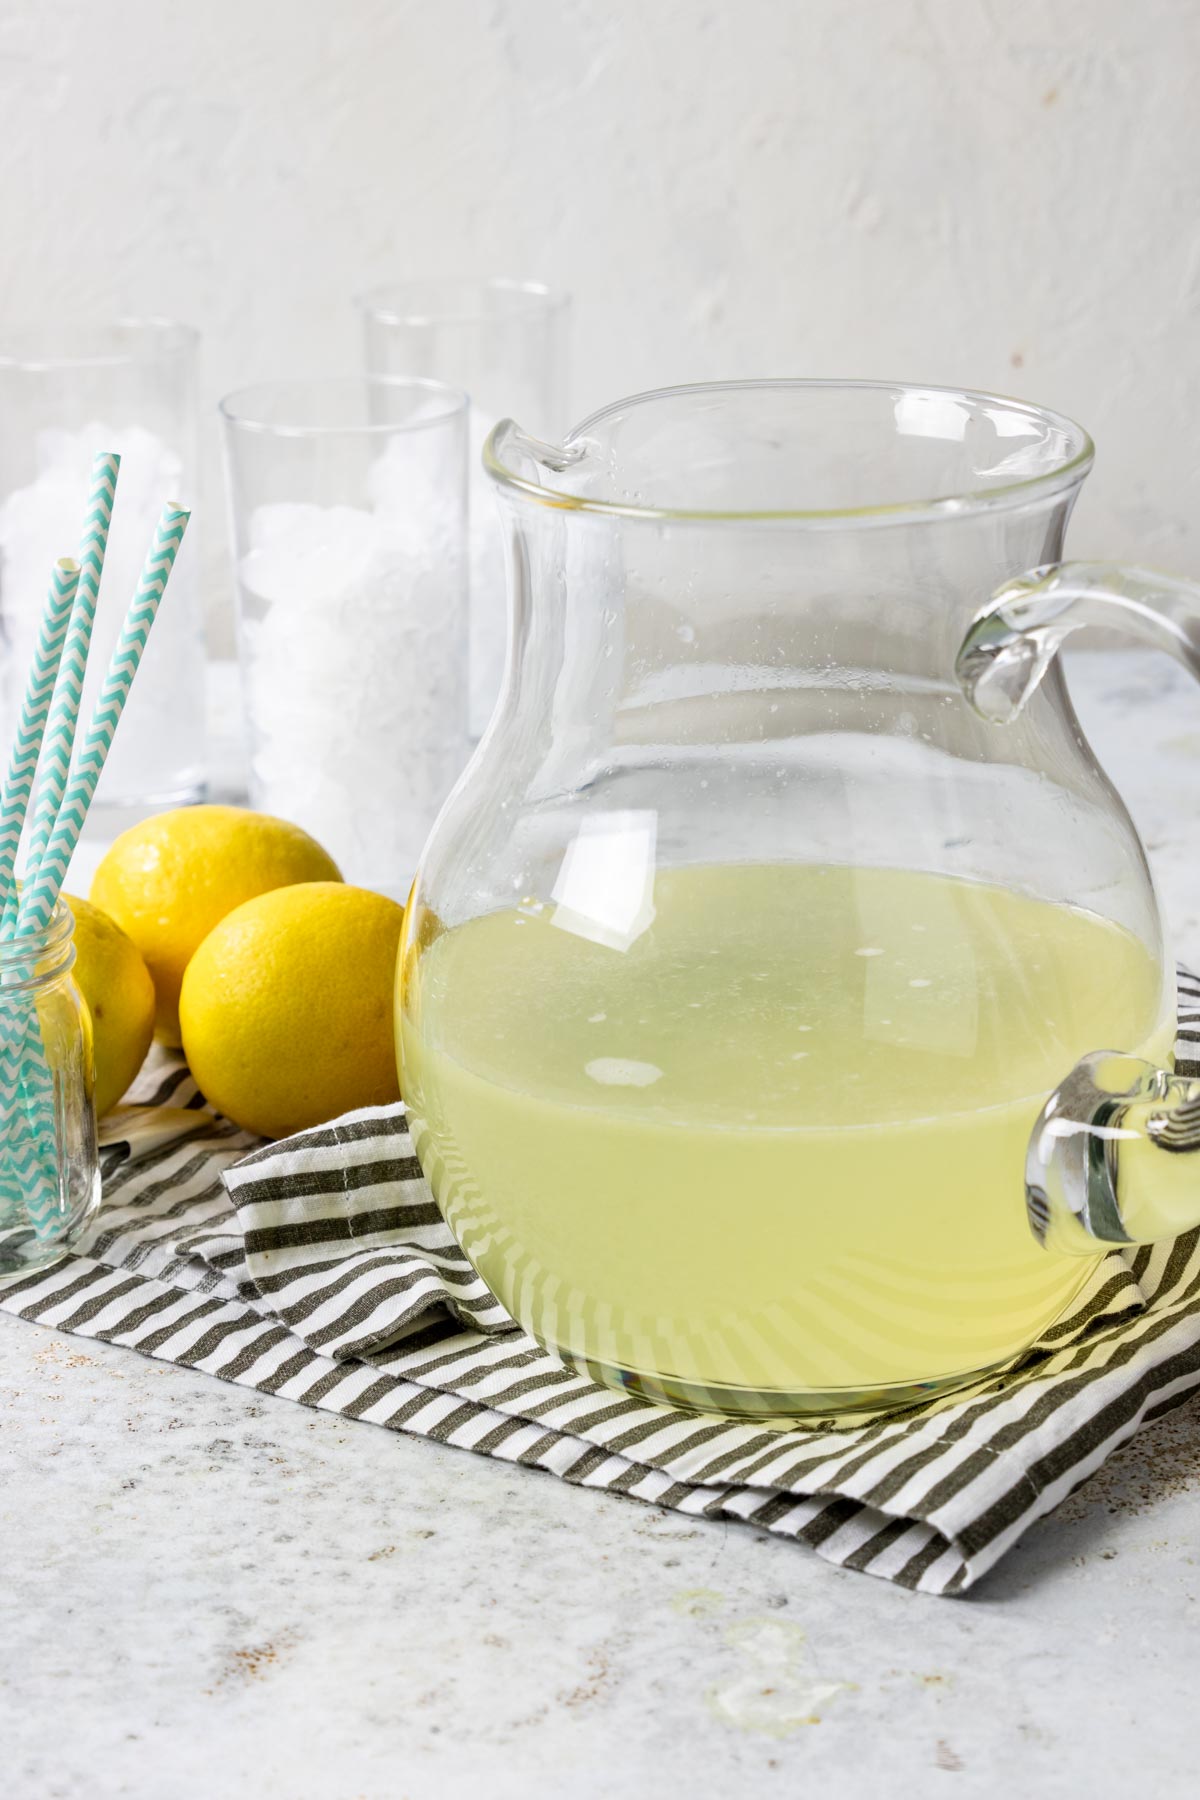 homemade lemonade in a glass pitcher with lemons to the side